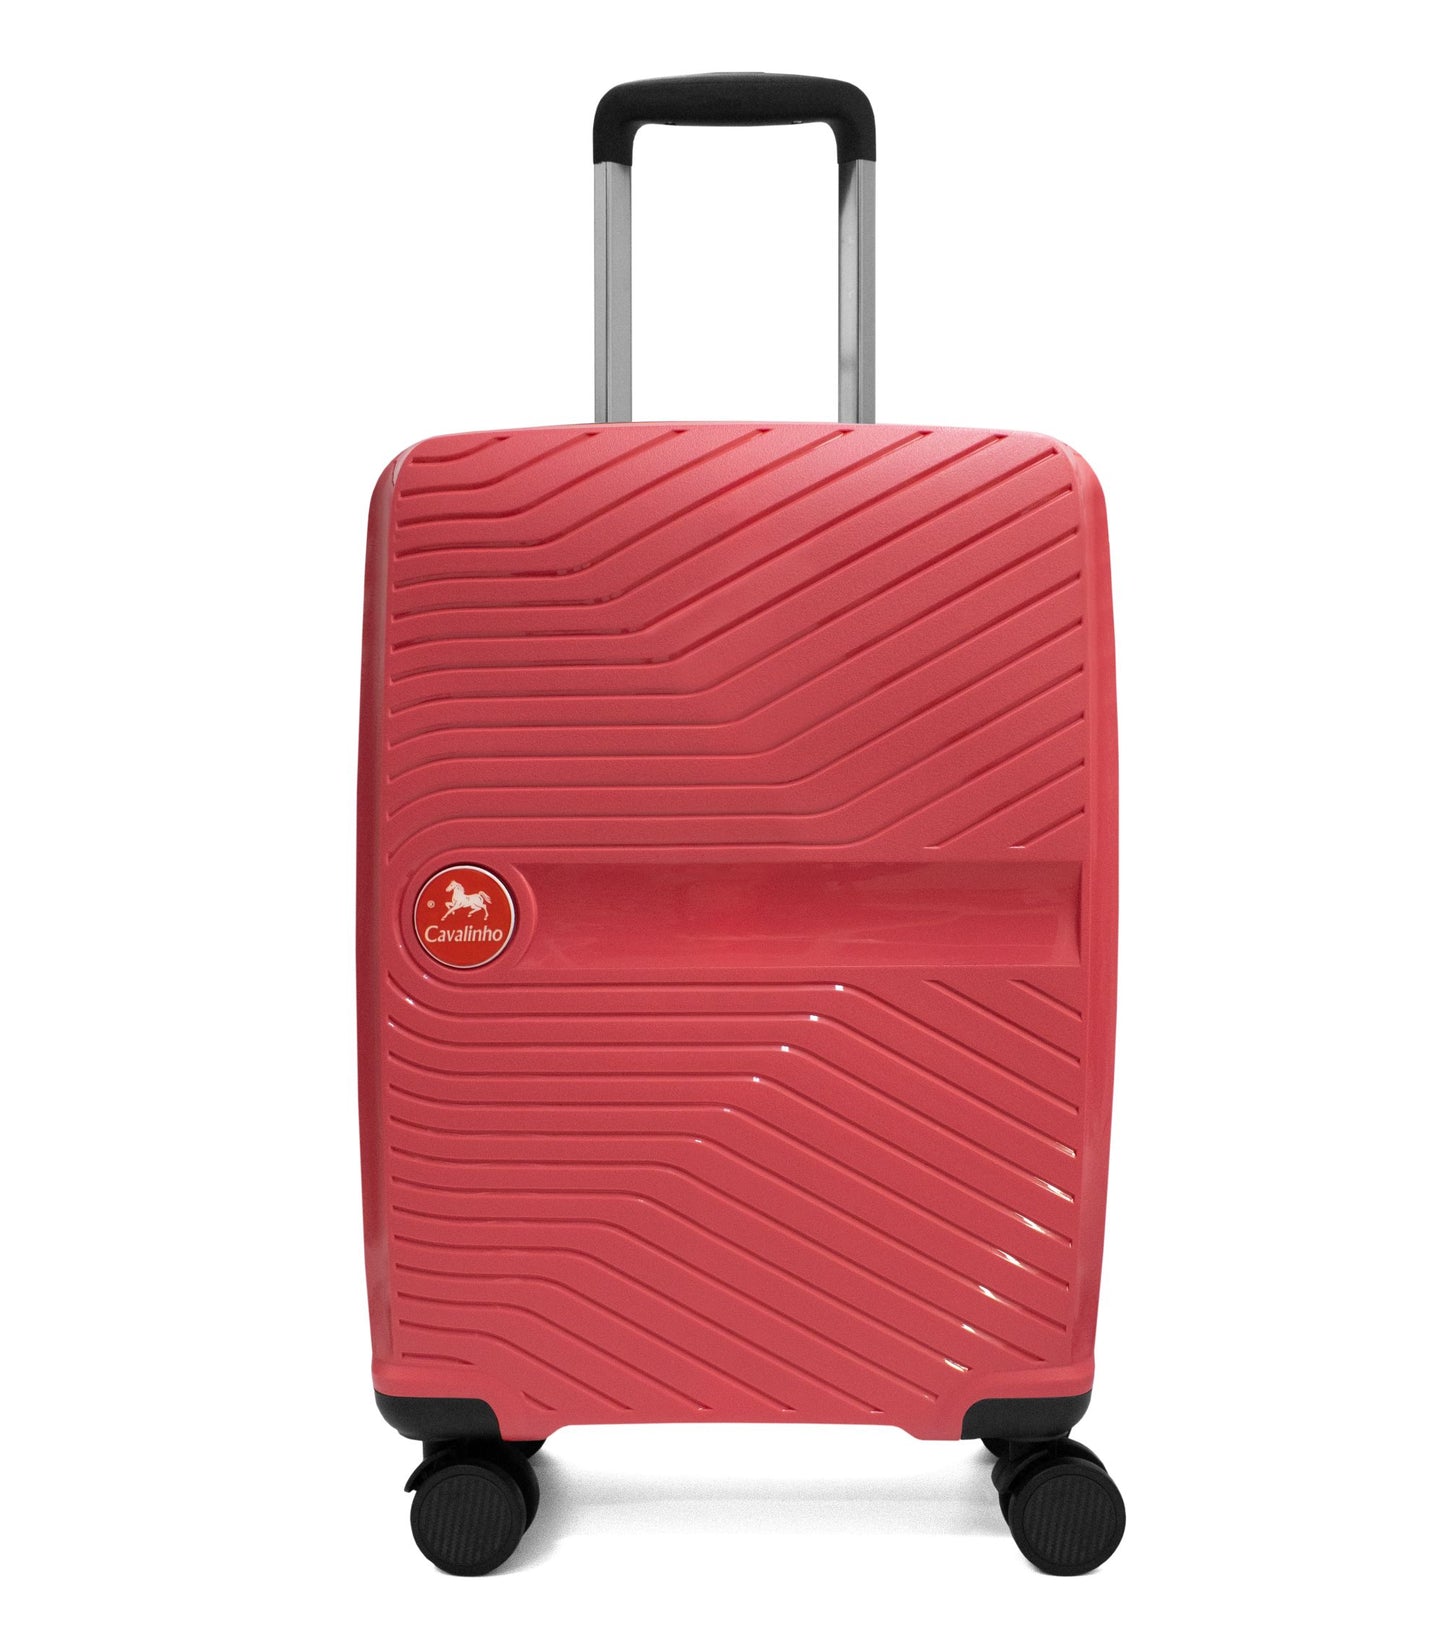 #color_ 19 inch Coral | Cavalinho Colorful Carry-on Hardside Luggage (19") - 19 inch Coral - 68020004.27.19_1